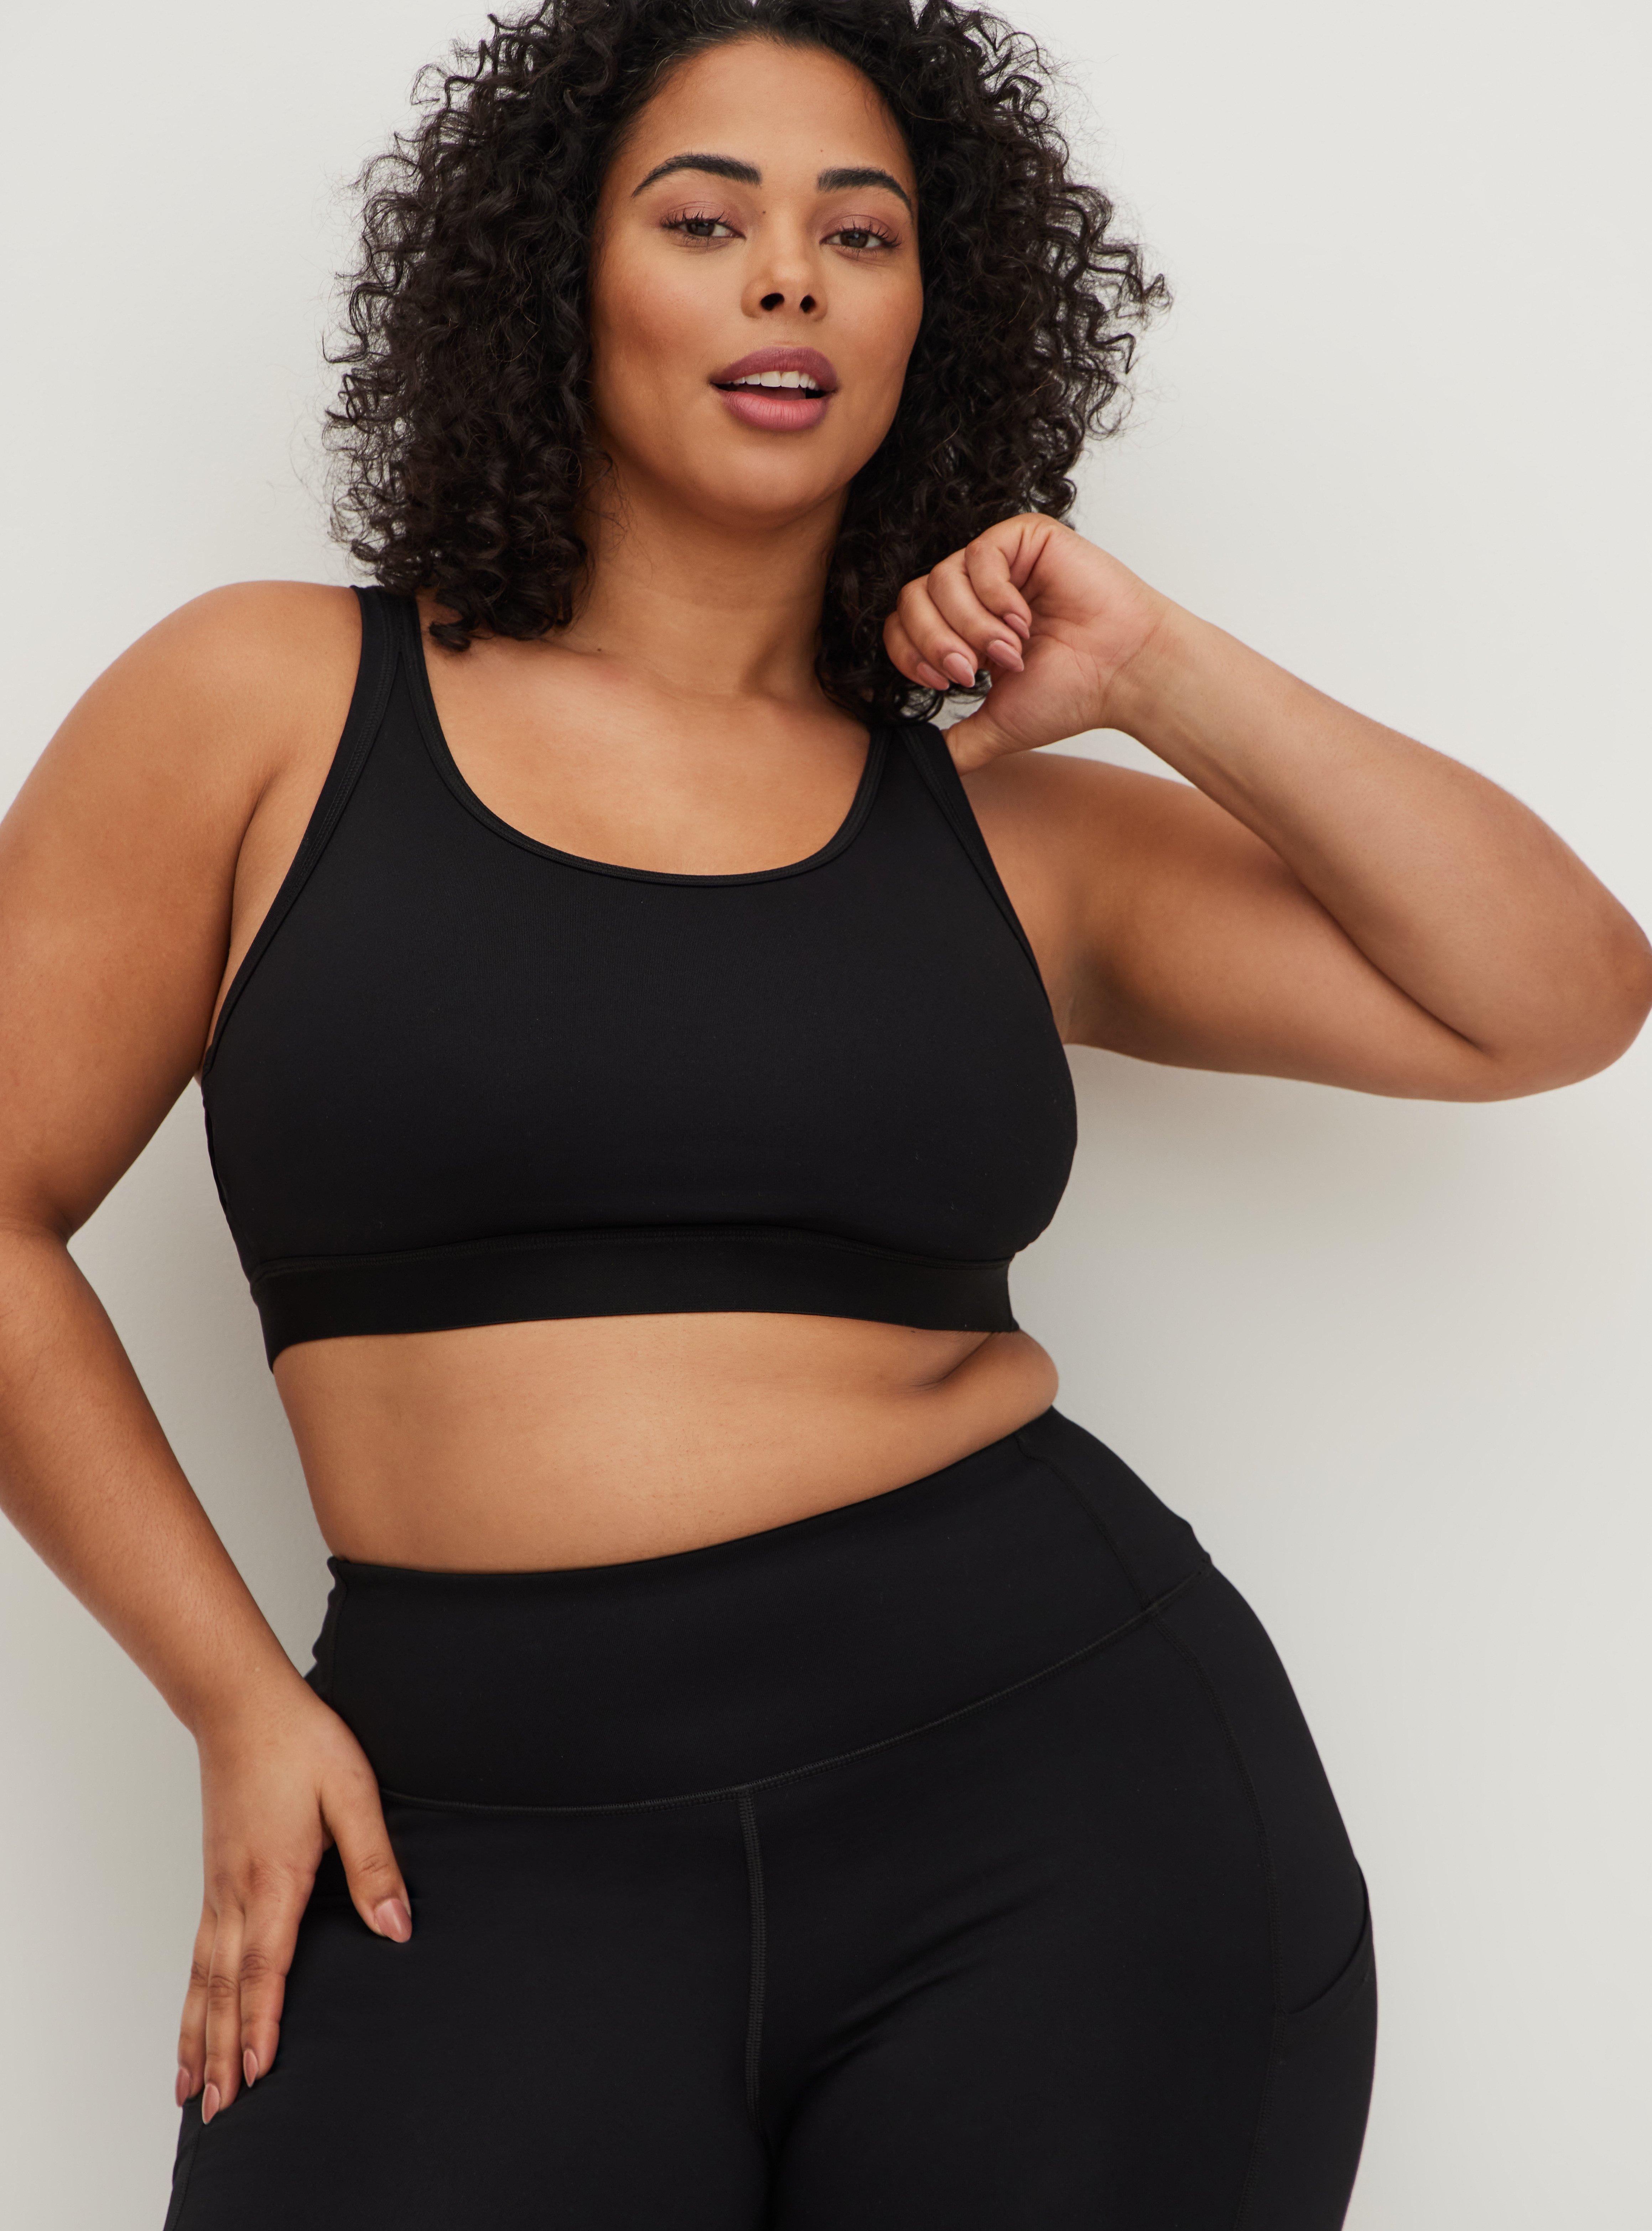 Plus Size - Active Wicking Sports Bra - Performance Core Black with Mesh  Back - Torrid